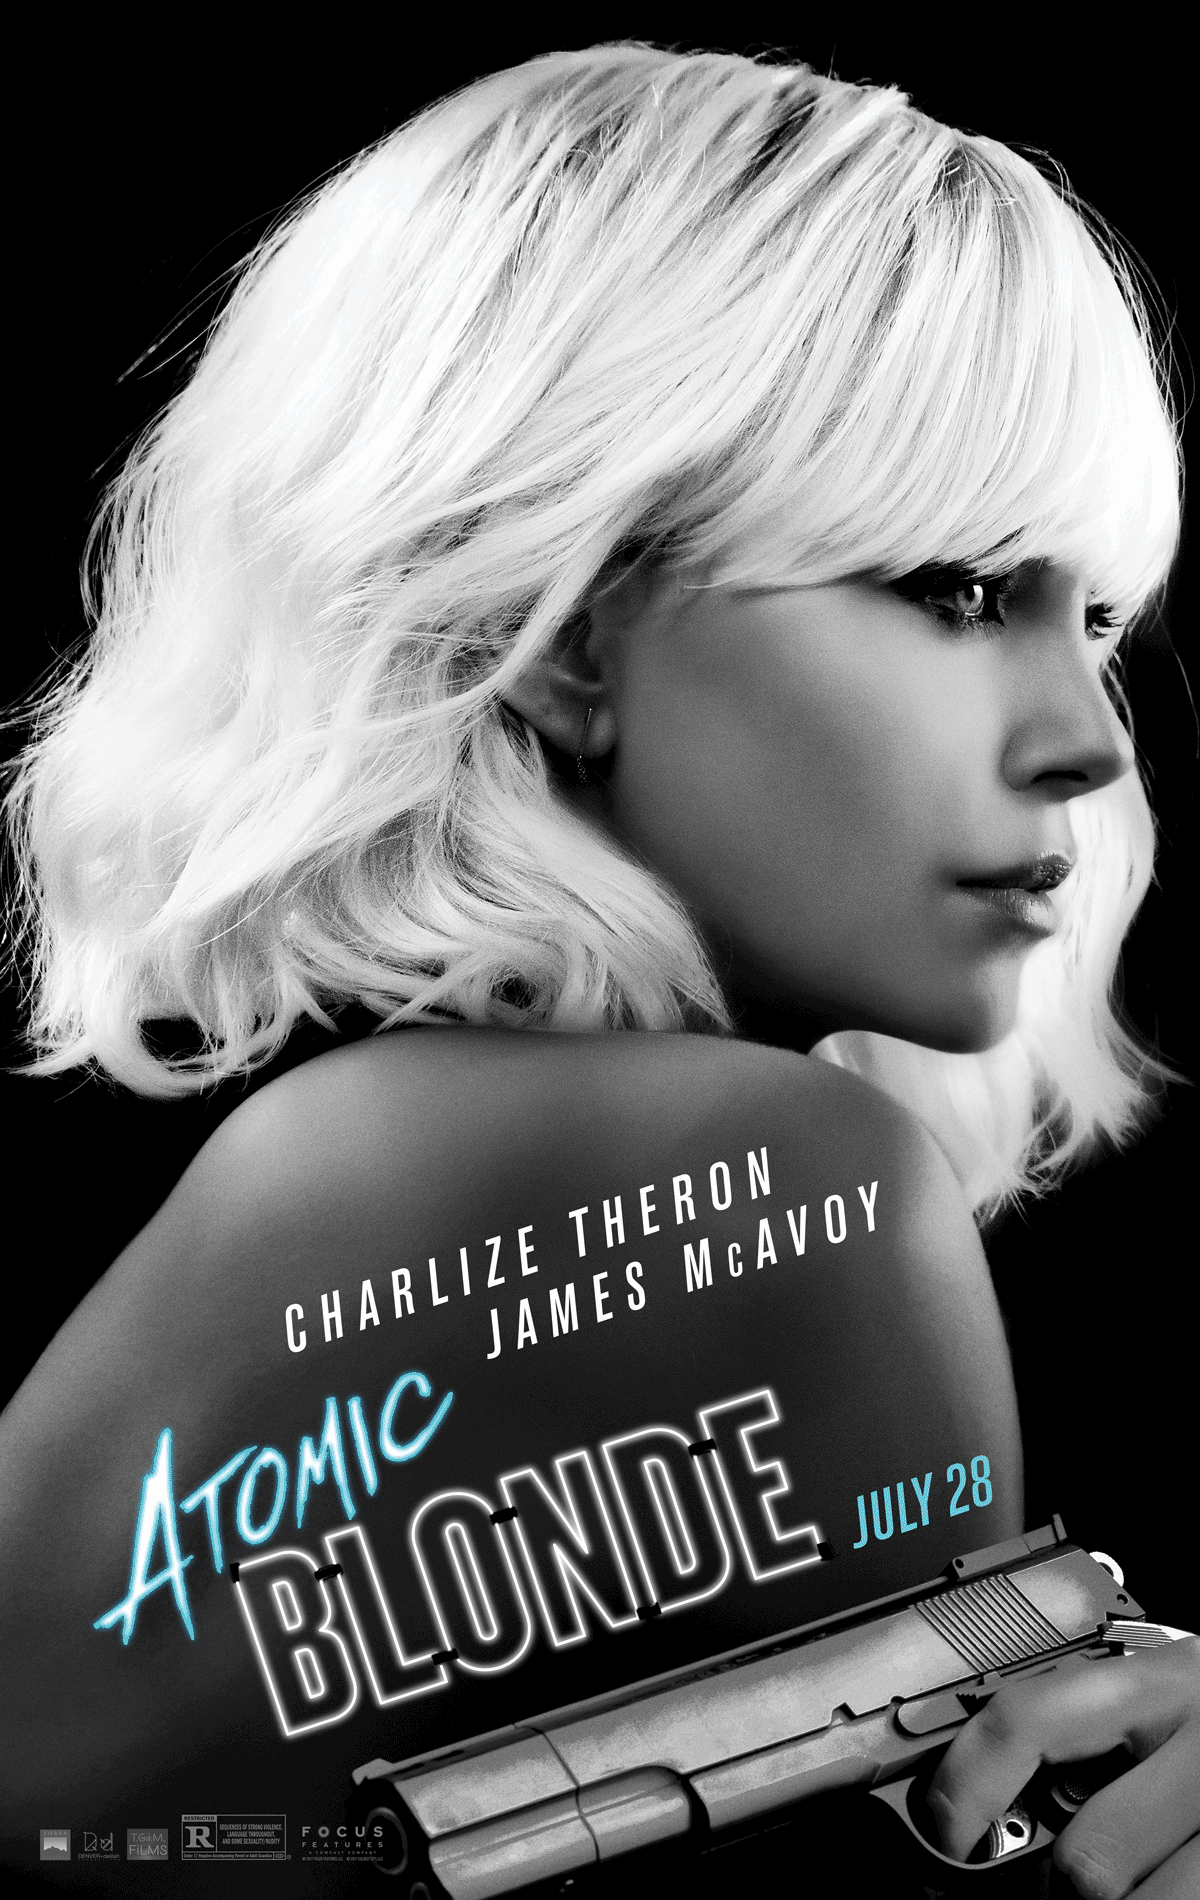 Atomic Blonde Poster. In Theaters Now